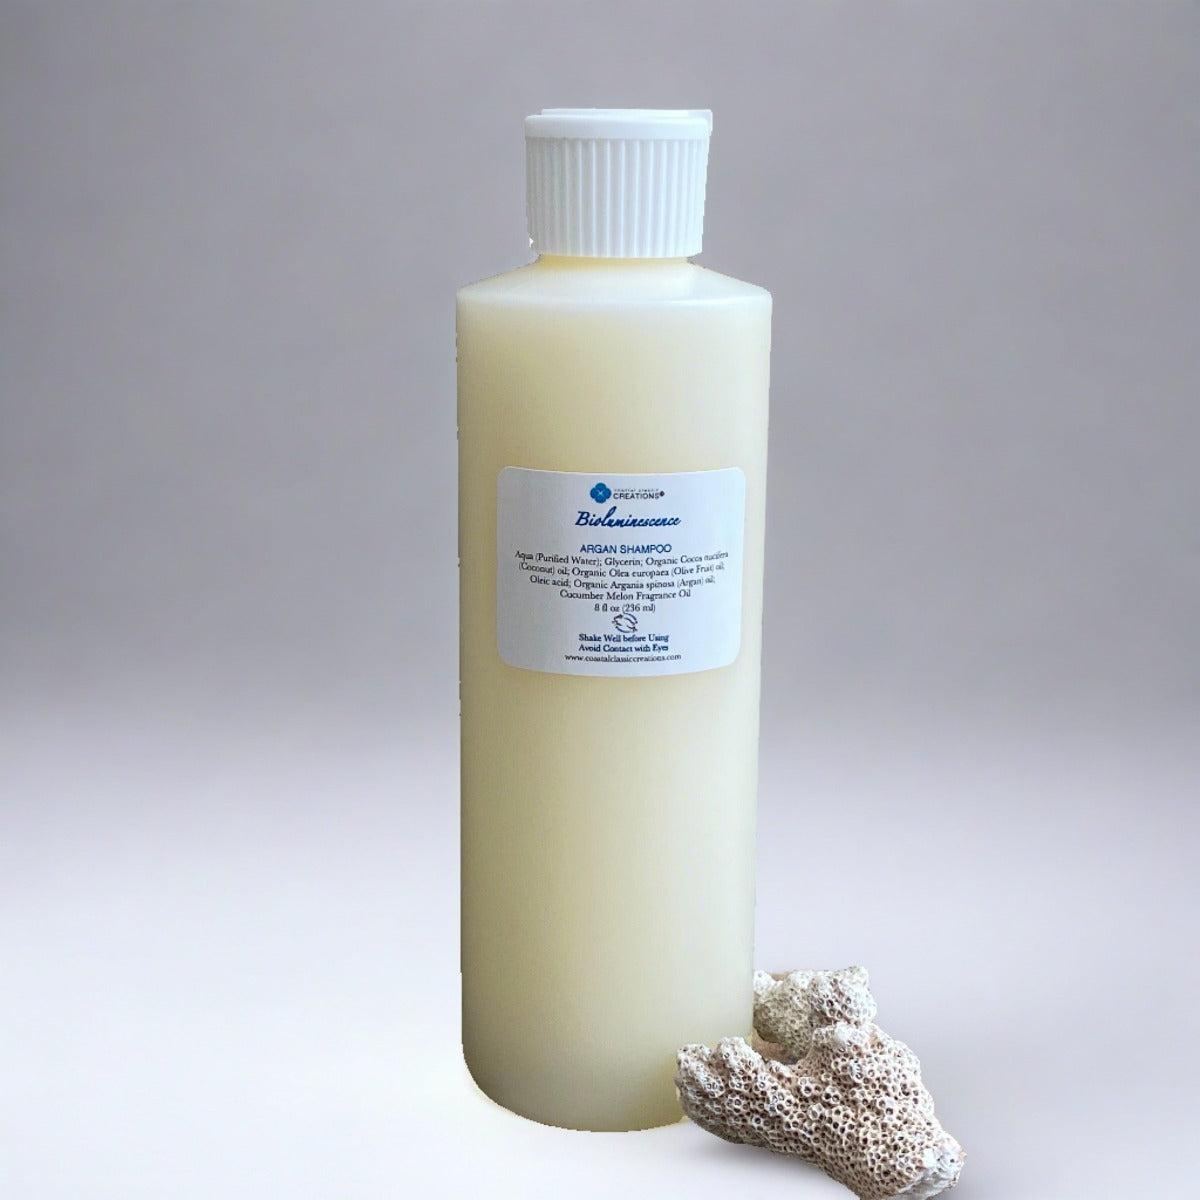 8 oz bottle of argan oil face wash with a white flip top cap labeled with the product name and ingredients, featuring a sleek, cylindrical shape